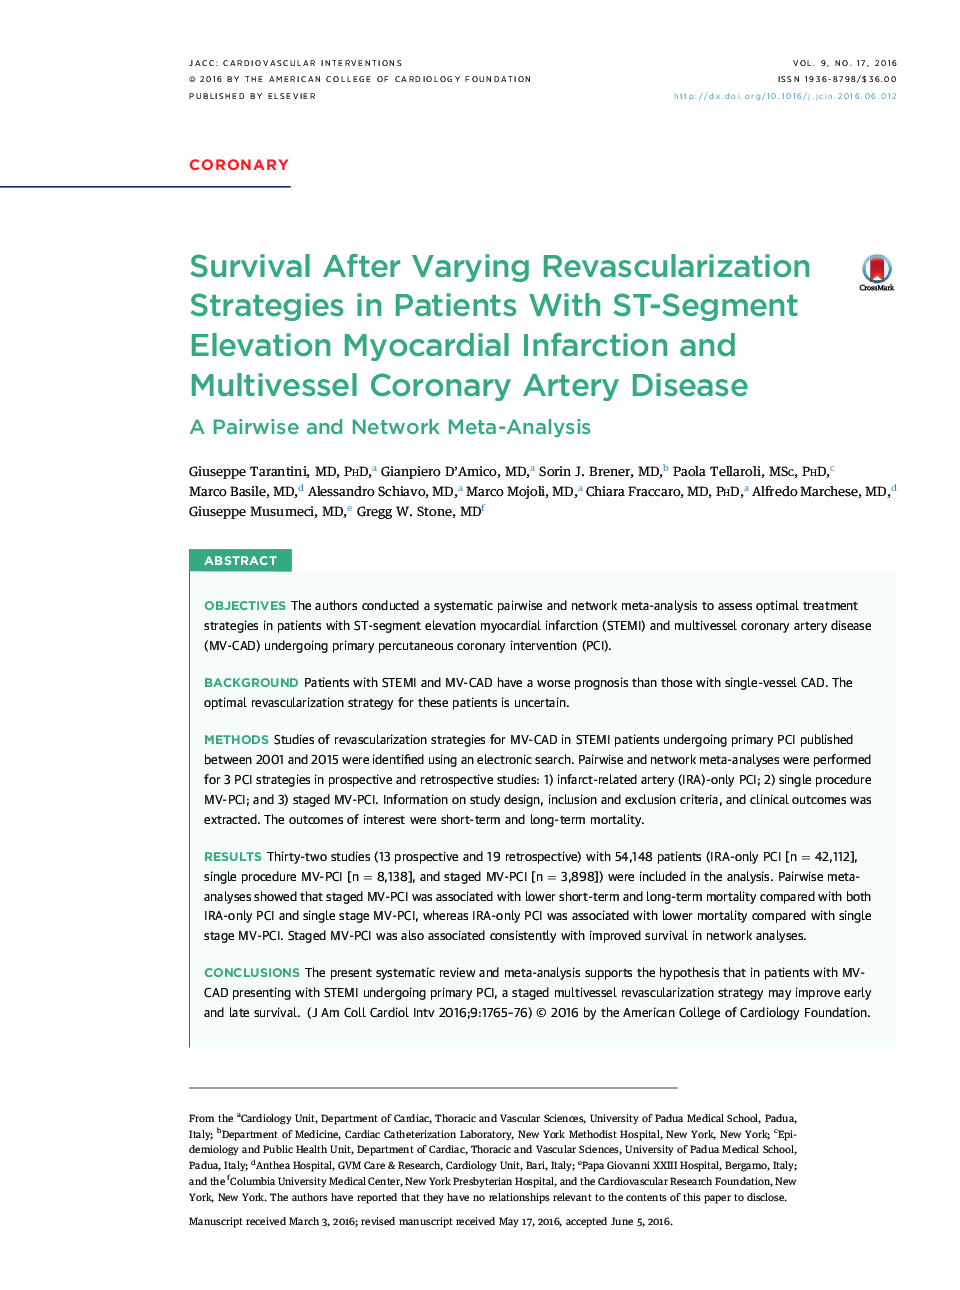 Survival After Varying Revascularization Strategies in Patients With ST-Segment Elevation Myocardial Infarction and Multivessel Coronary Artery Disease : A Pairwise and Network Meta-Analysis